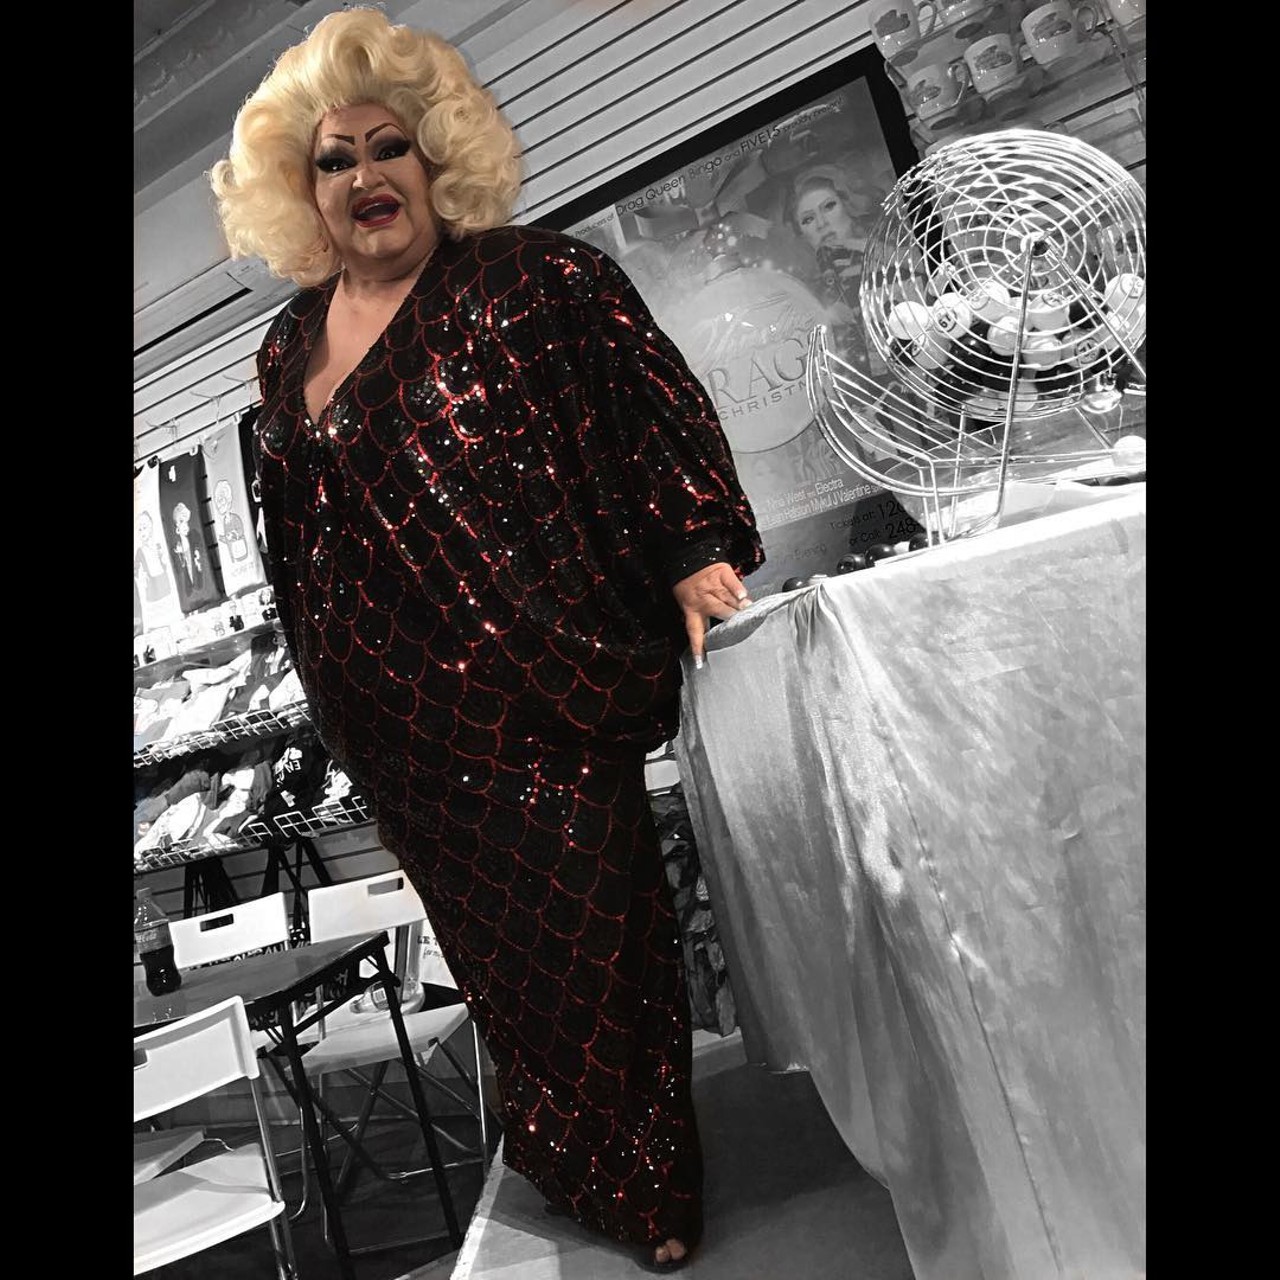 Five15 Media, Mojo and More - 8 years and running, Five 15 hosts drag queen bingo every Thursday, Friday, Saturday and Sunday for brunch. Admission is $20 all days except Sunday which is $30 for the included brunch buffet. Address is 515 South Washington Avenue Royal Oak, Michigan, 48067. https://five15.net/. Photo.